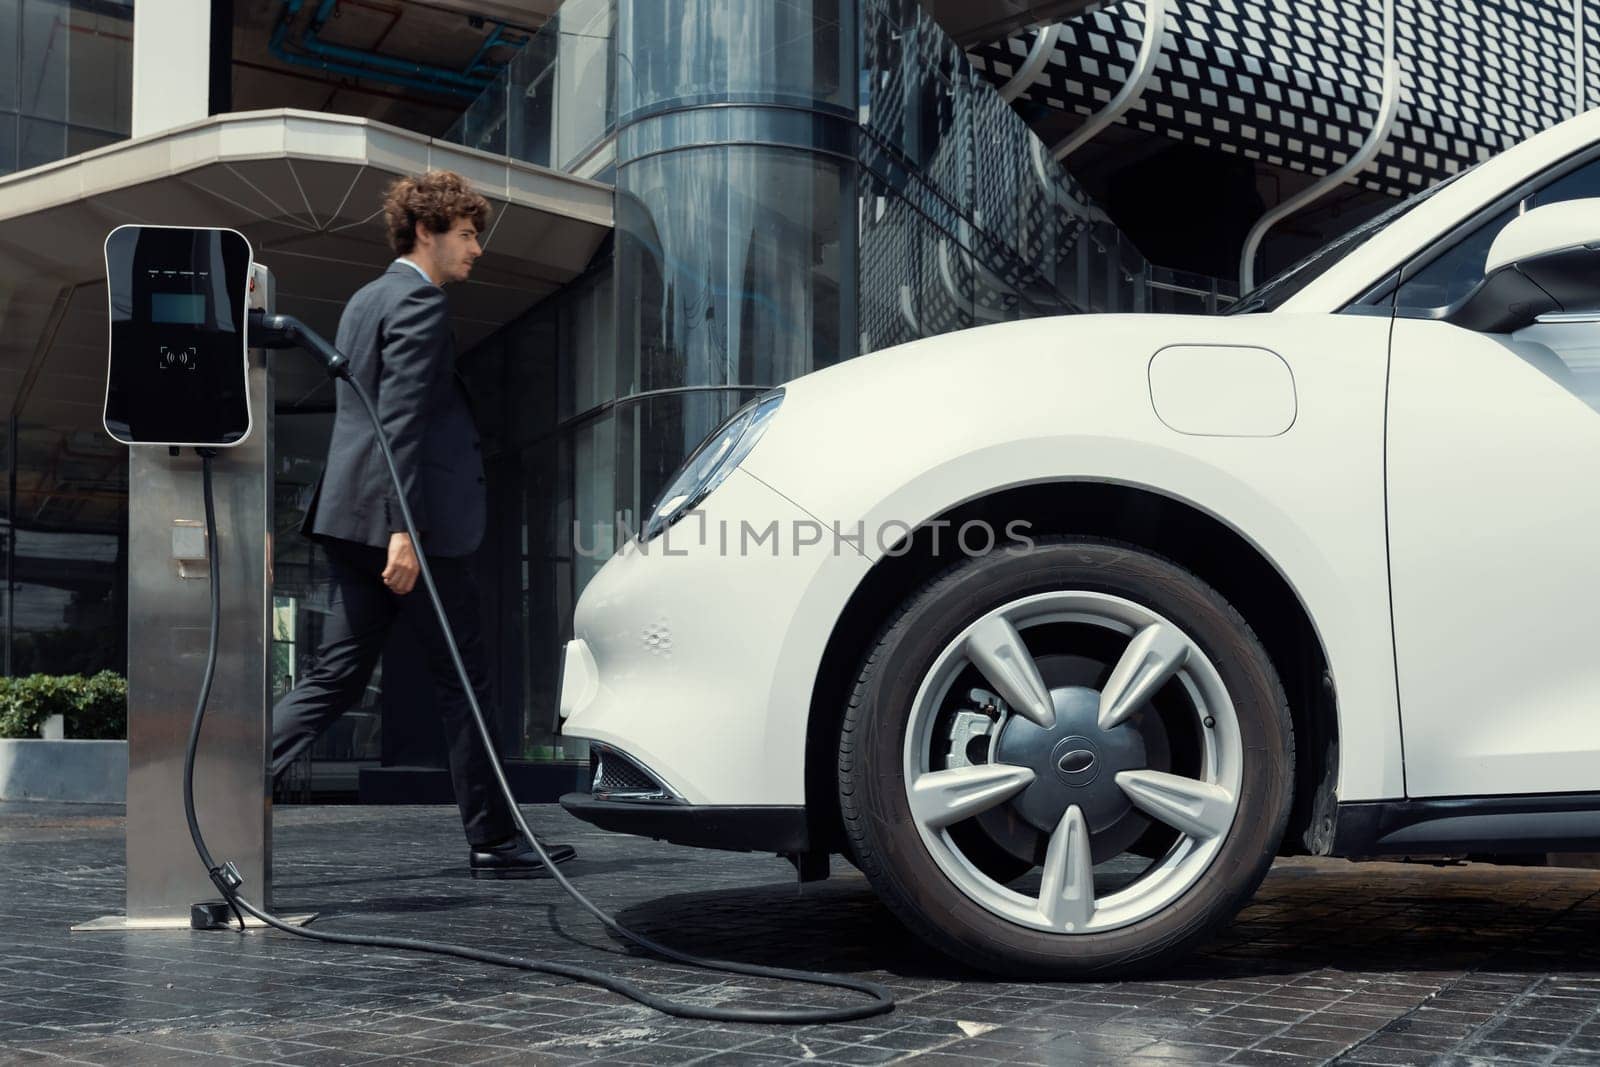 Below view of progressive businessman with electric car recharging at public charging station at modern city residential building. Eco friendly rechargeable EV car powered by alternative clean energy.